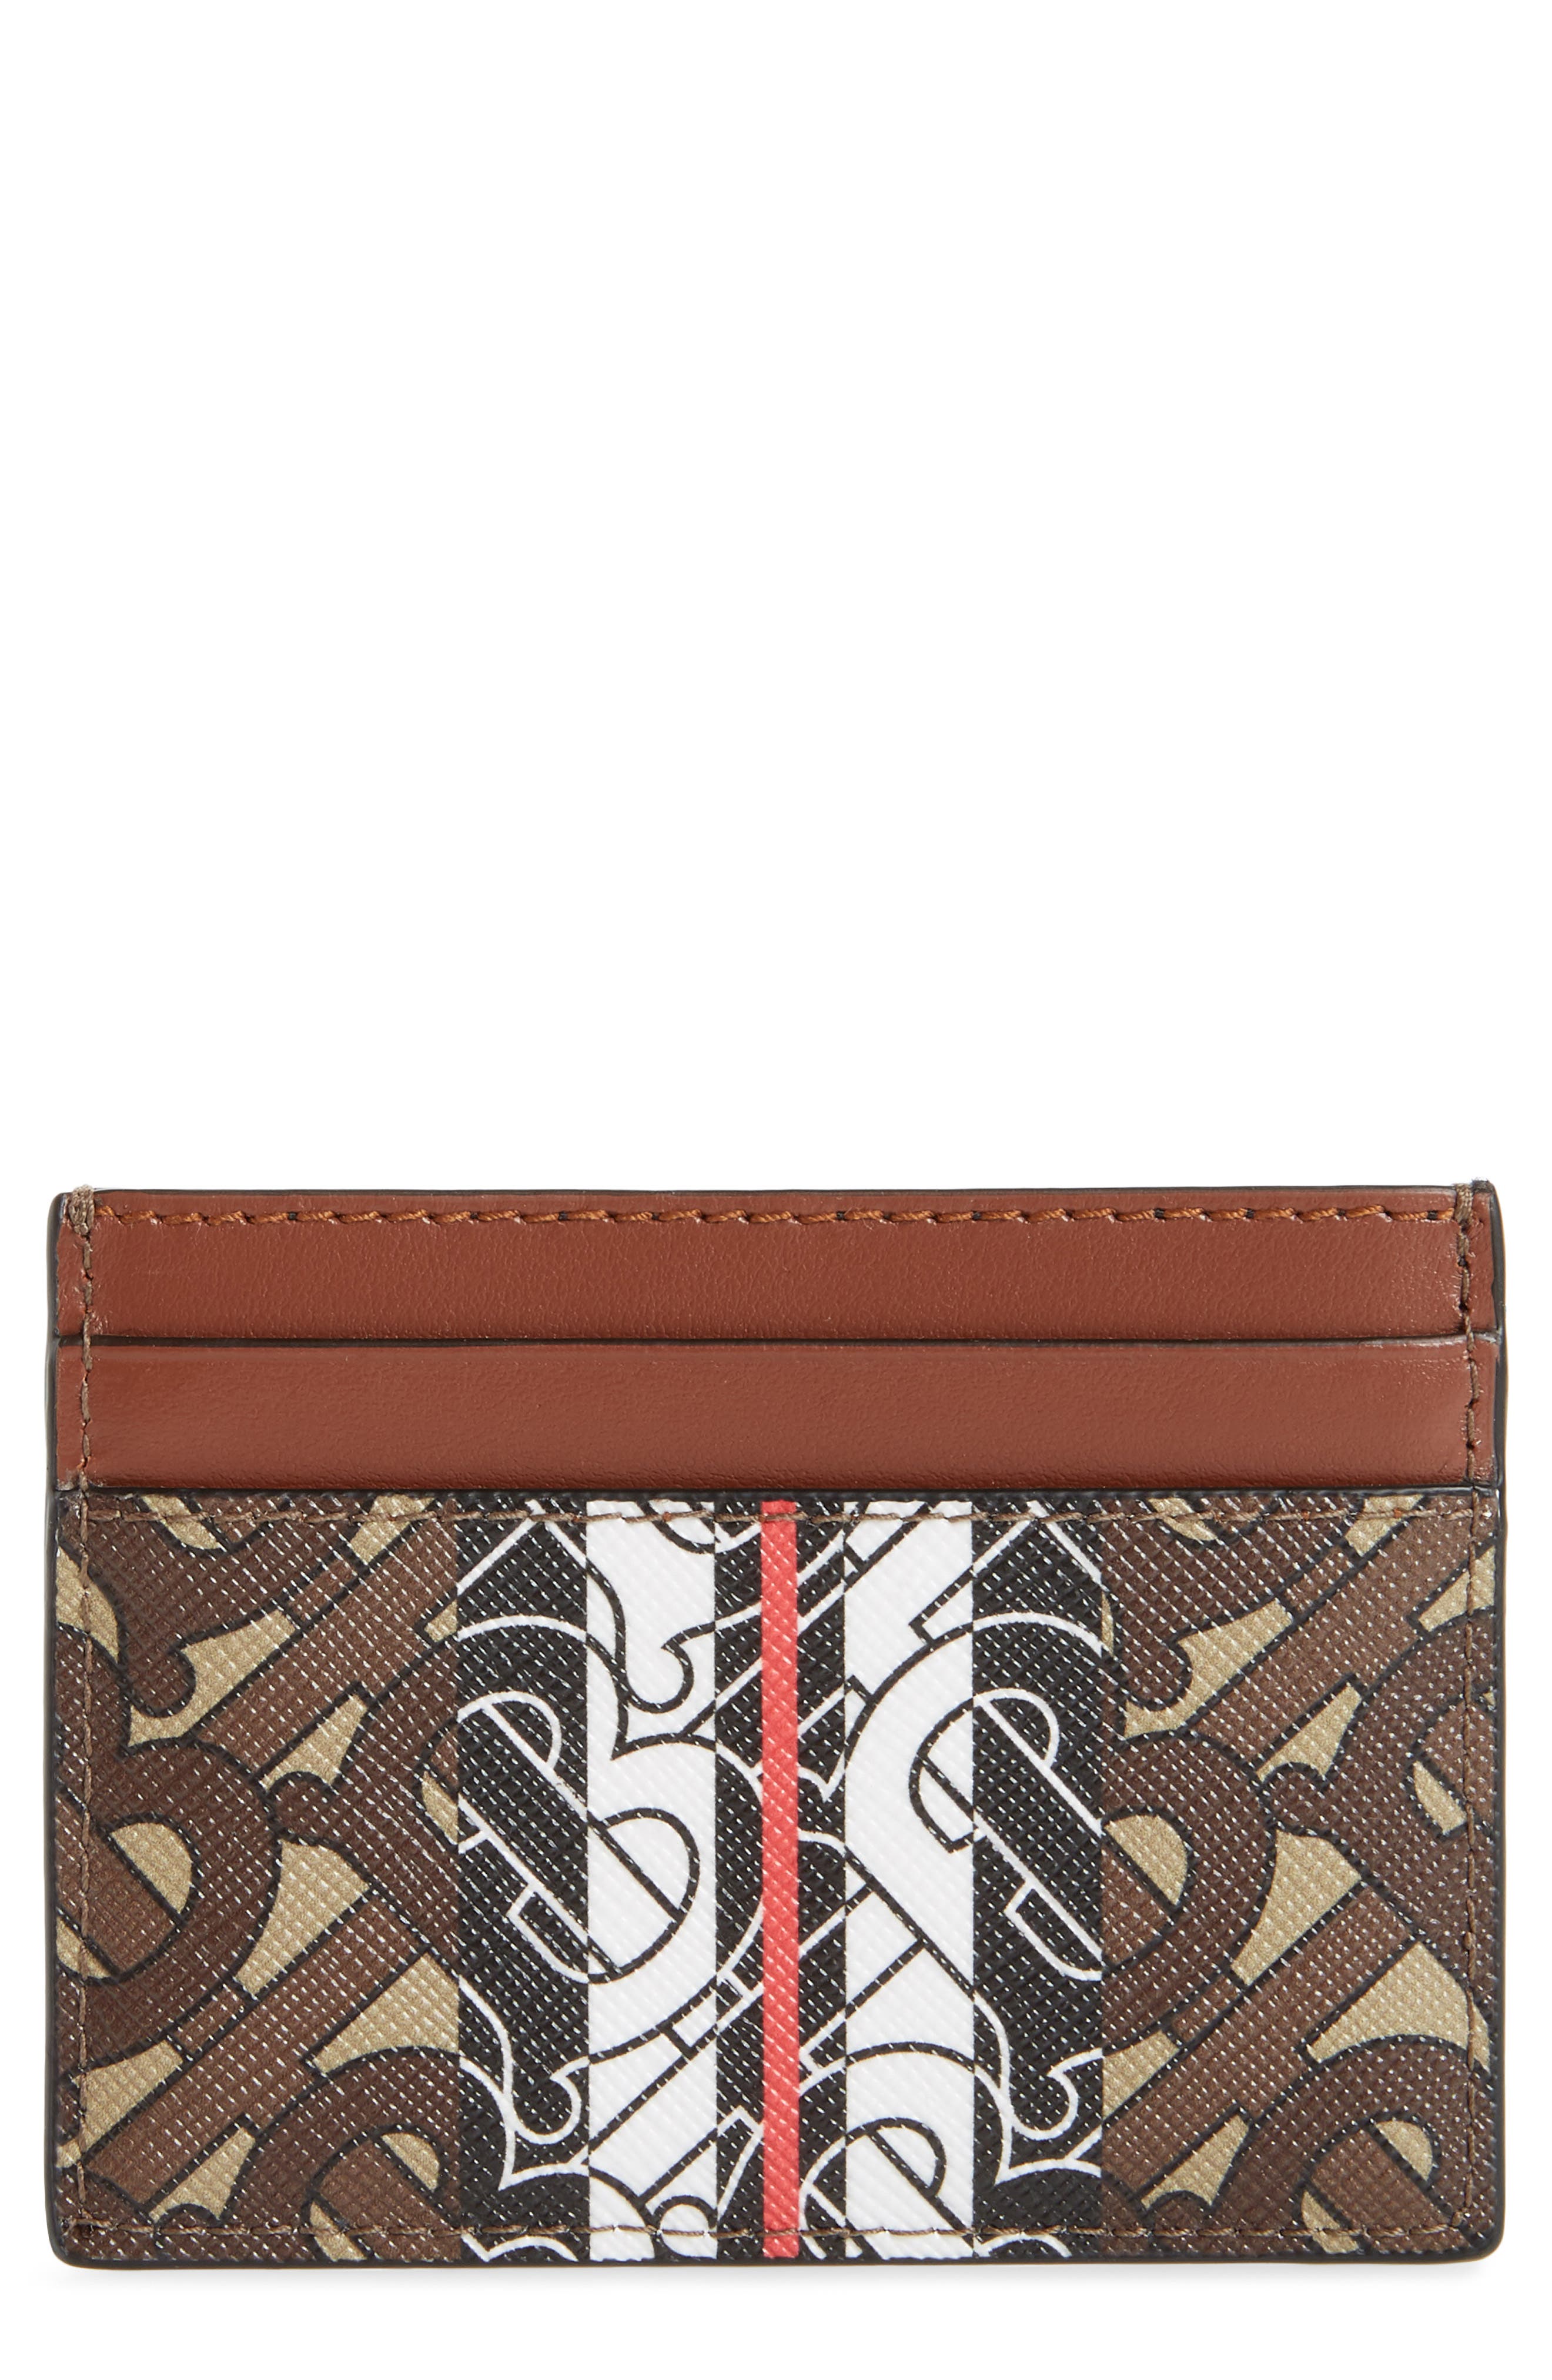 Burberry Sandon TB Monogram E-Canvas Card Holder in Bridle Brown at Nordstrom